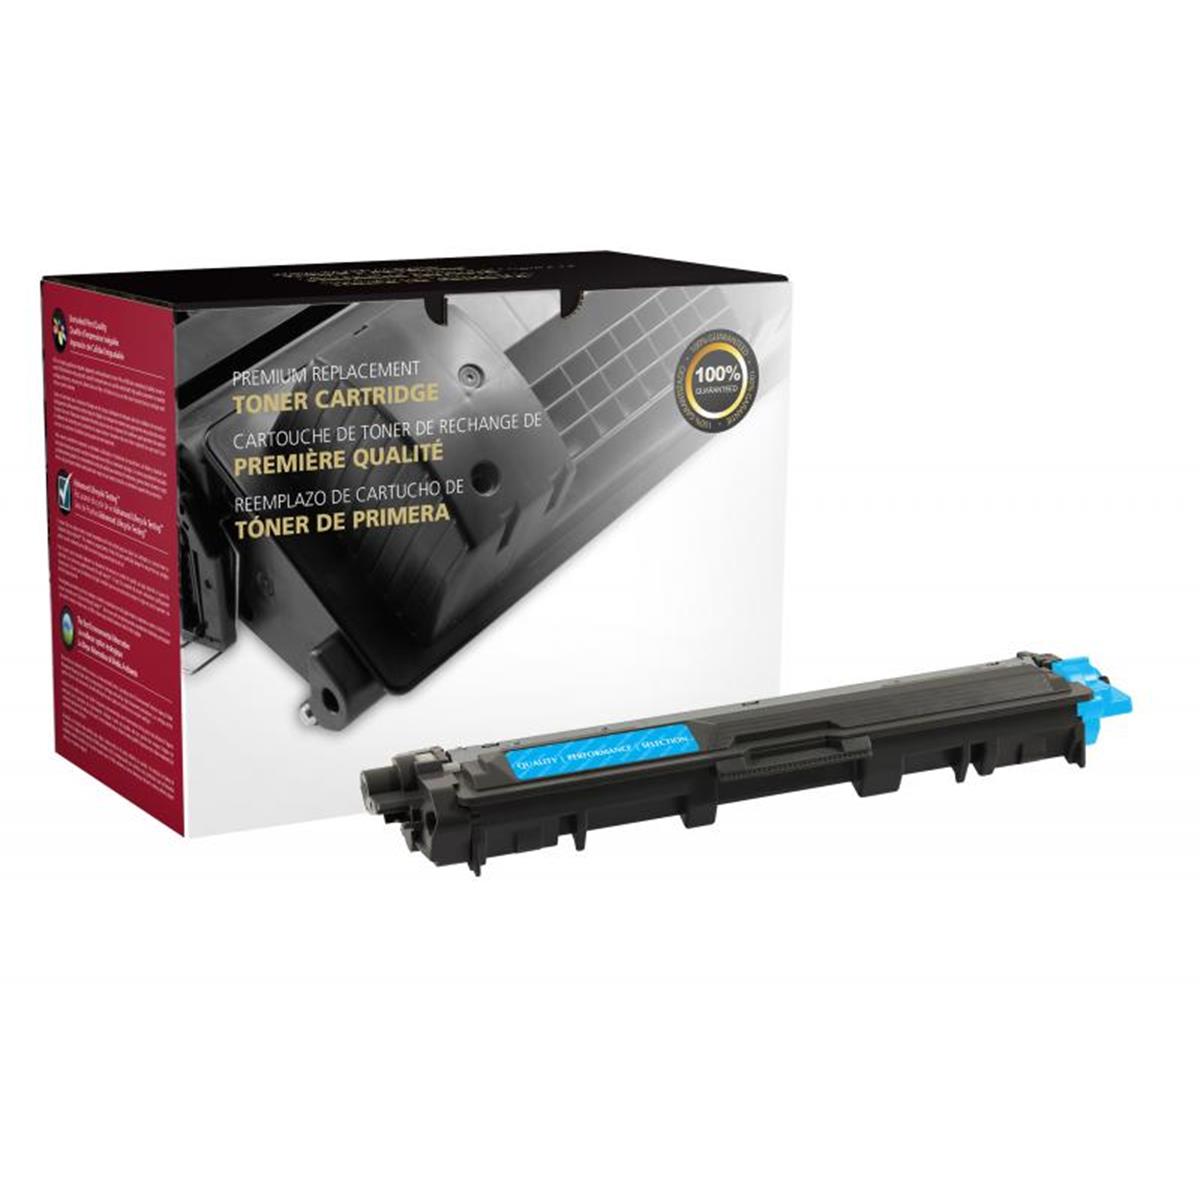 Picture of Brother 200729P Cyan Toner Cartridge for TN221